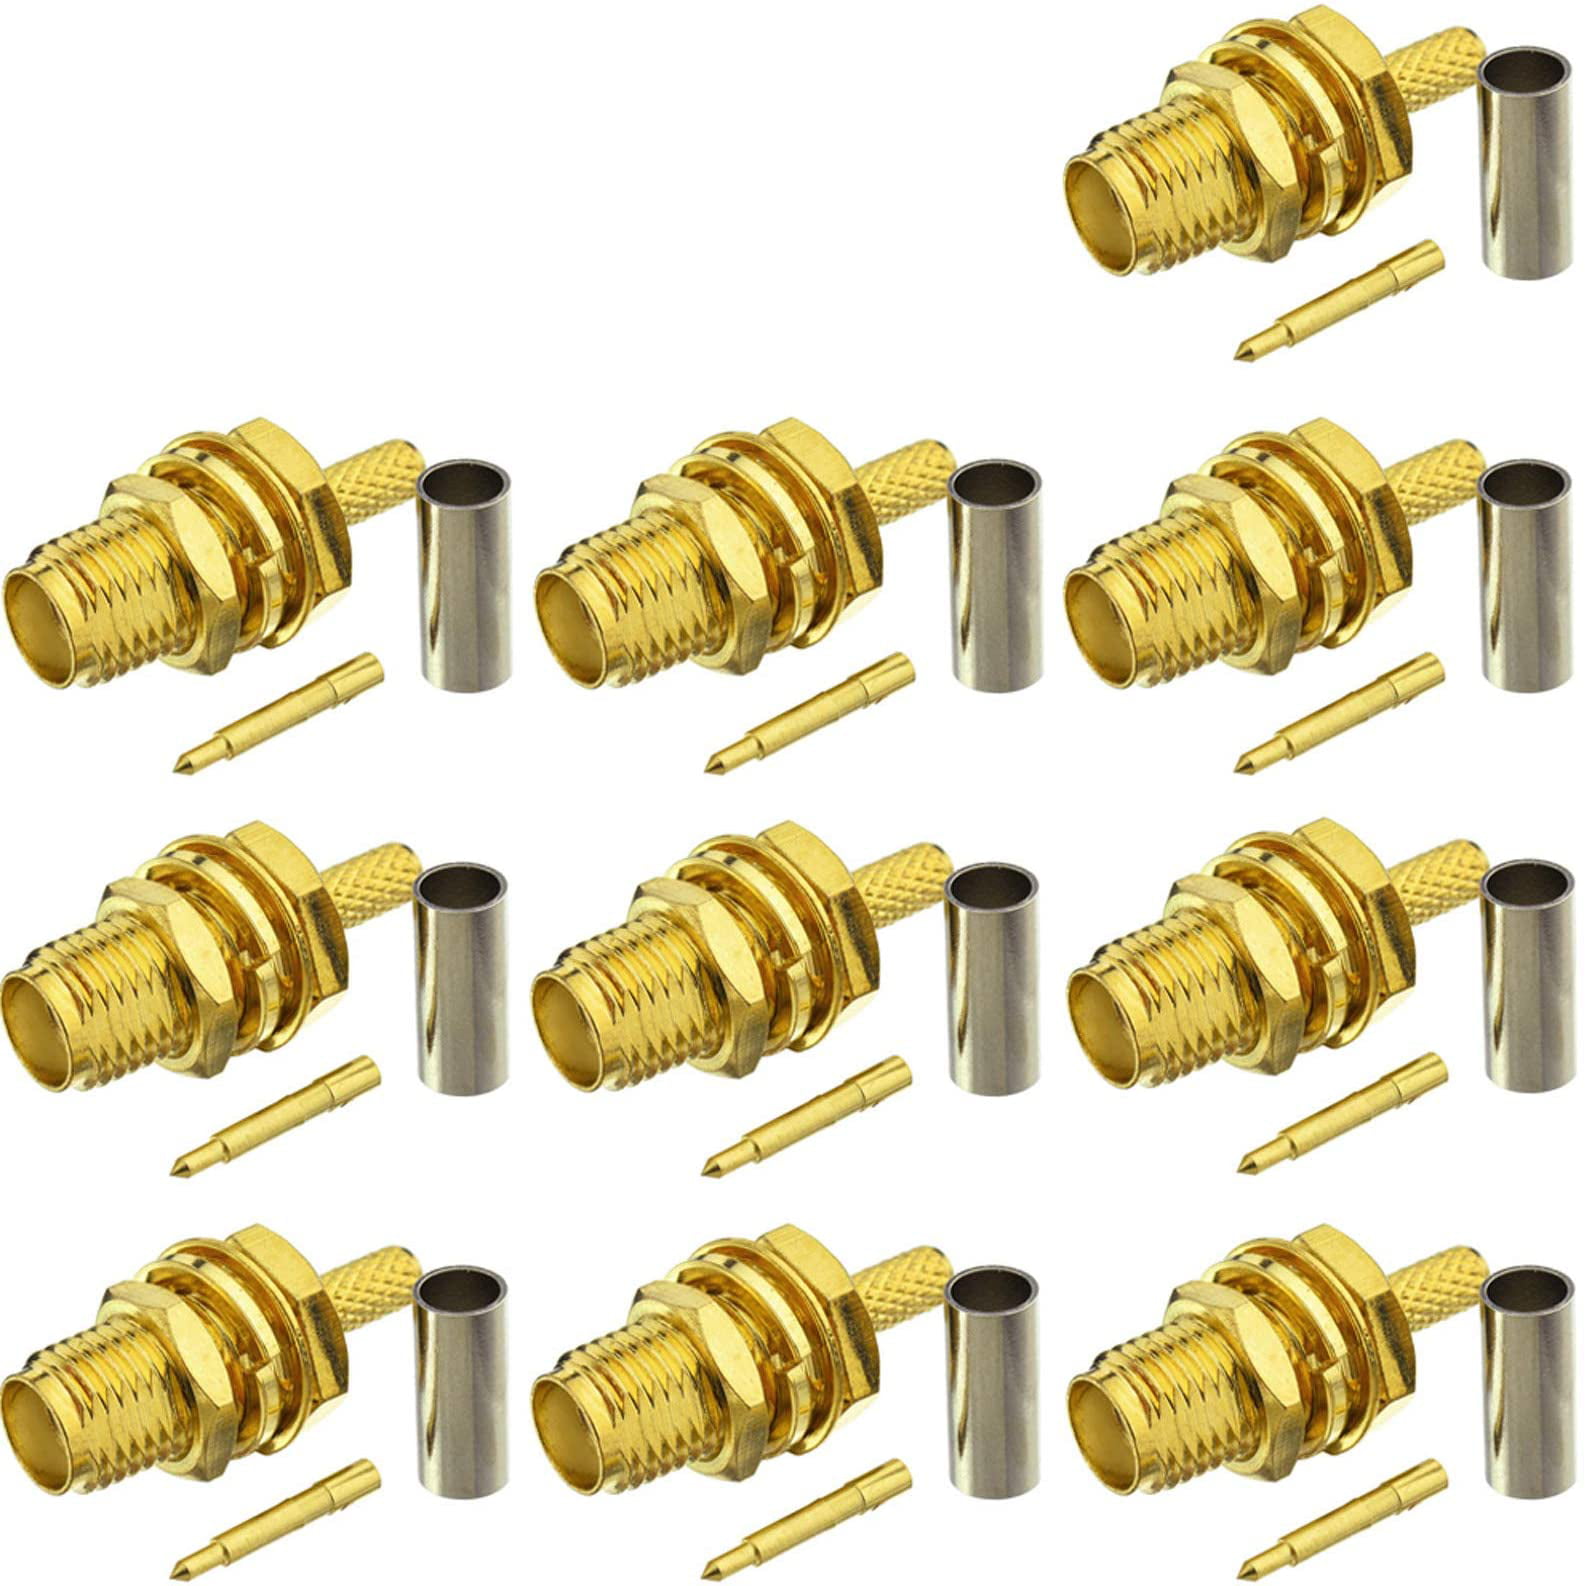 10 PCS Gold Plated Crimp SMA Male Straight Connector Adapter for RG174 RG188 RG316 /LMR100 Cable 